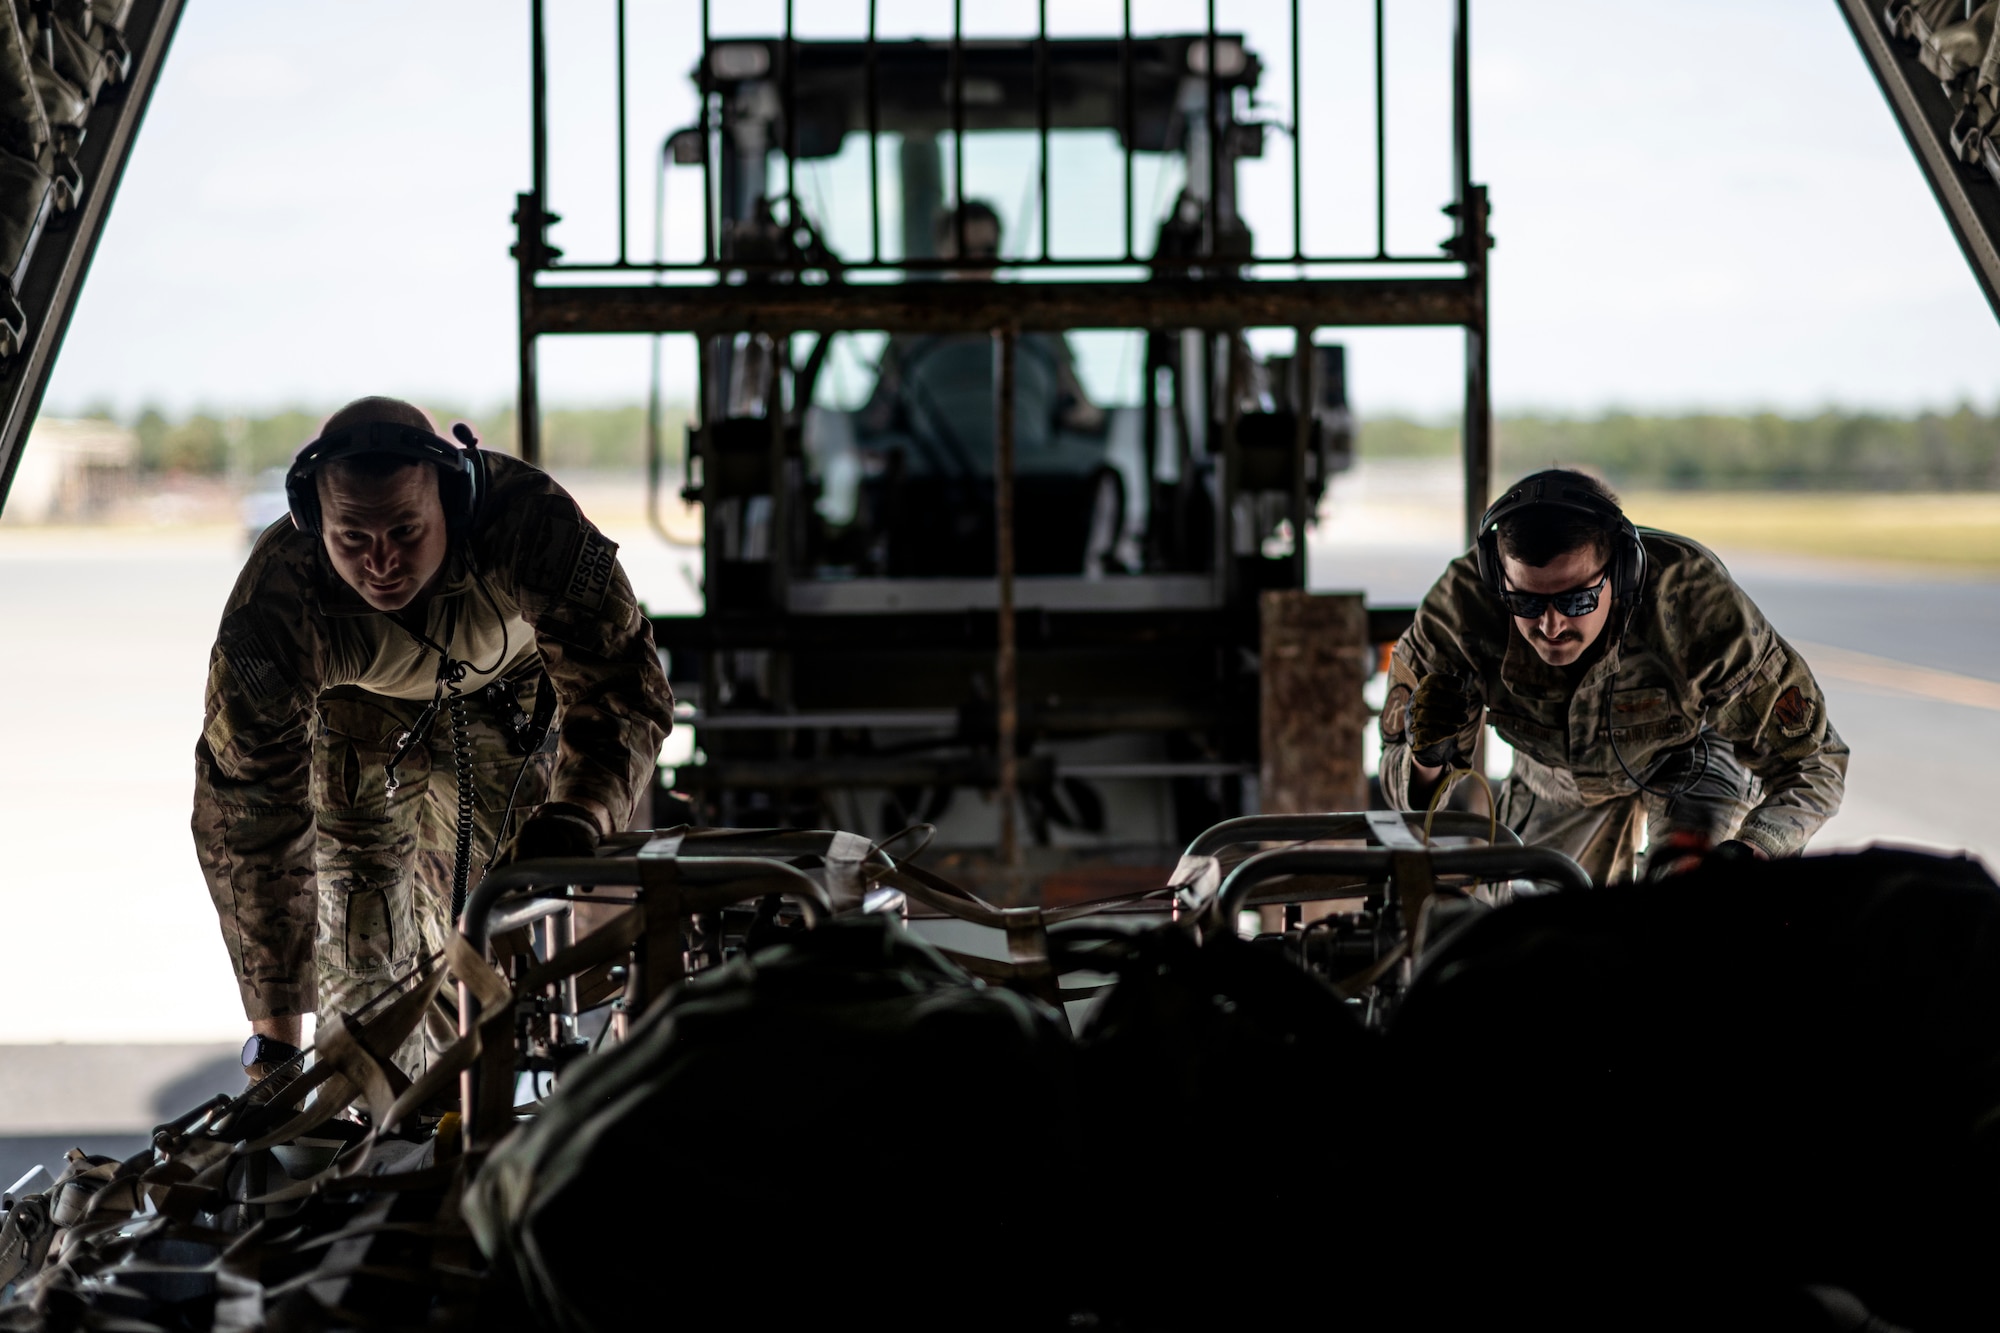 U.S. Air Force loadmasters assigned to the 71st Rescue Squadron push cargo into an HC-130J Combat King II during Exercise Ready Tiger 24-1 at Avon Park Air Force Range, Florida, April 10, 2024. The 71st RQS provided essential airlift support for transporting cargo and personnel, and responded to combat search and rescue scenarios. During Ready Tiger 24-1, the 23rd Wing will be evaluated on the integration of Air Force Force Generation principles such as Agile Combat Employment, integrated combat turns, forward aerial refueling points, multi-capable Airmen, and combat search and rescue capabilities. (U.S. Air Force photo by Tech. Sgt. Devin Boyer)